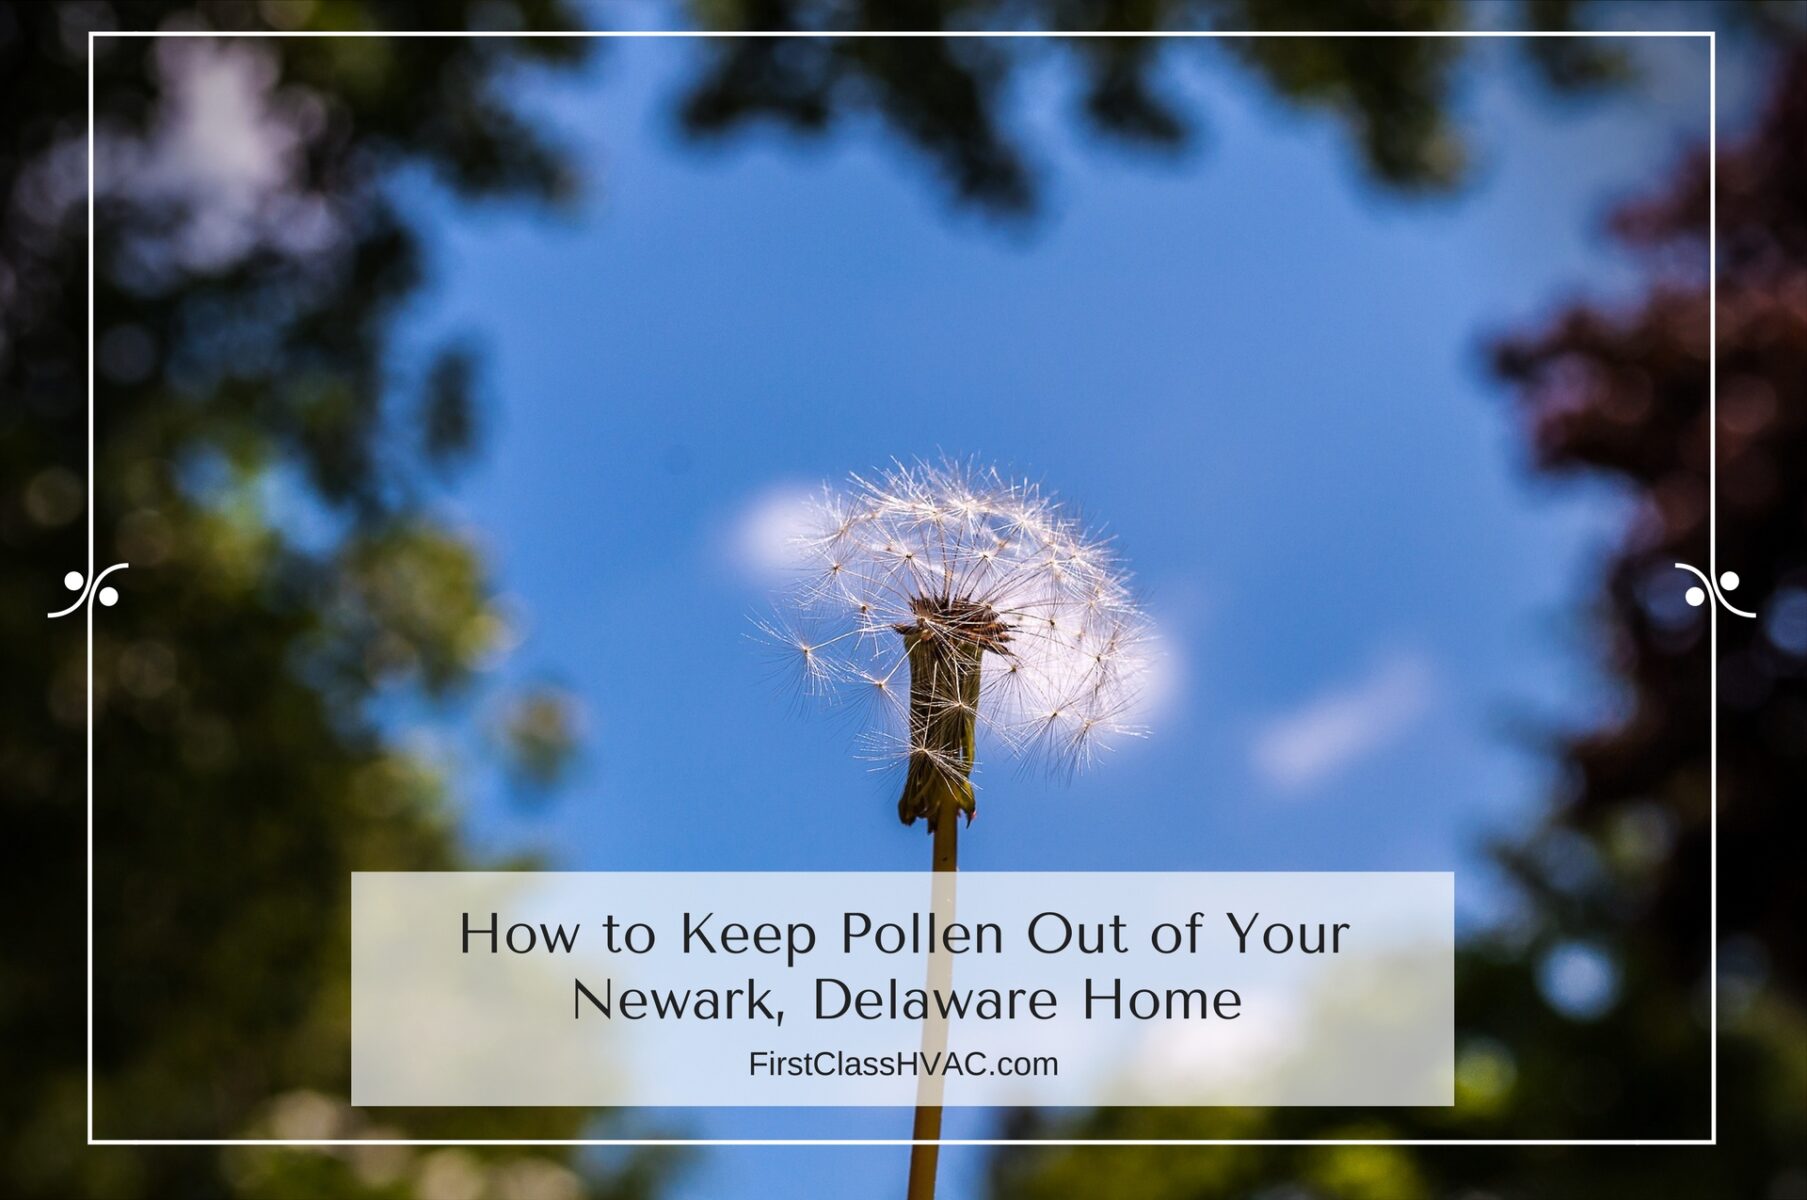 How to Keep Pollen Out of Your Newark, Delaware Home